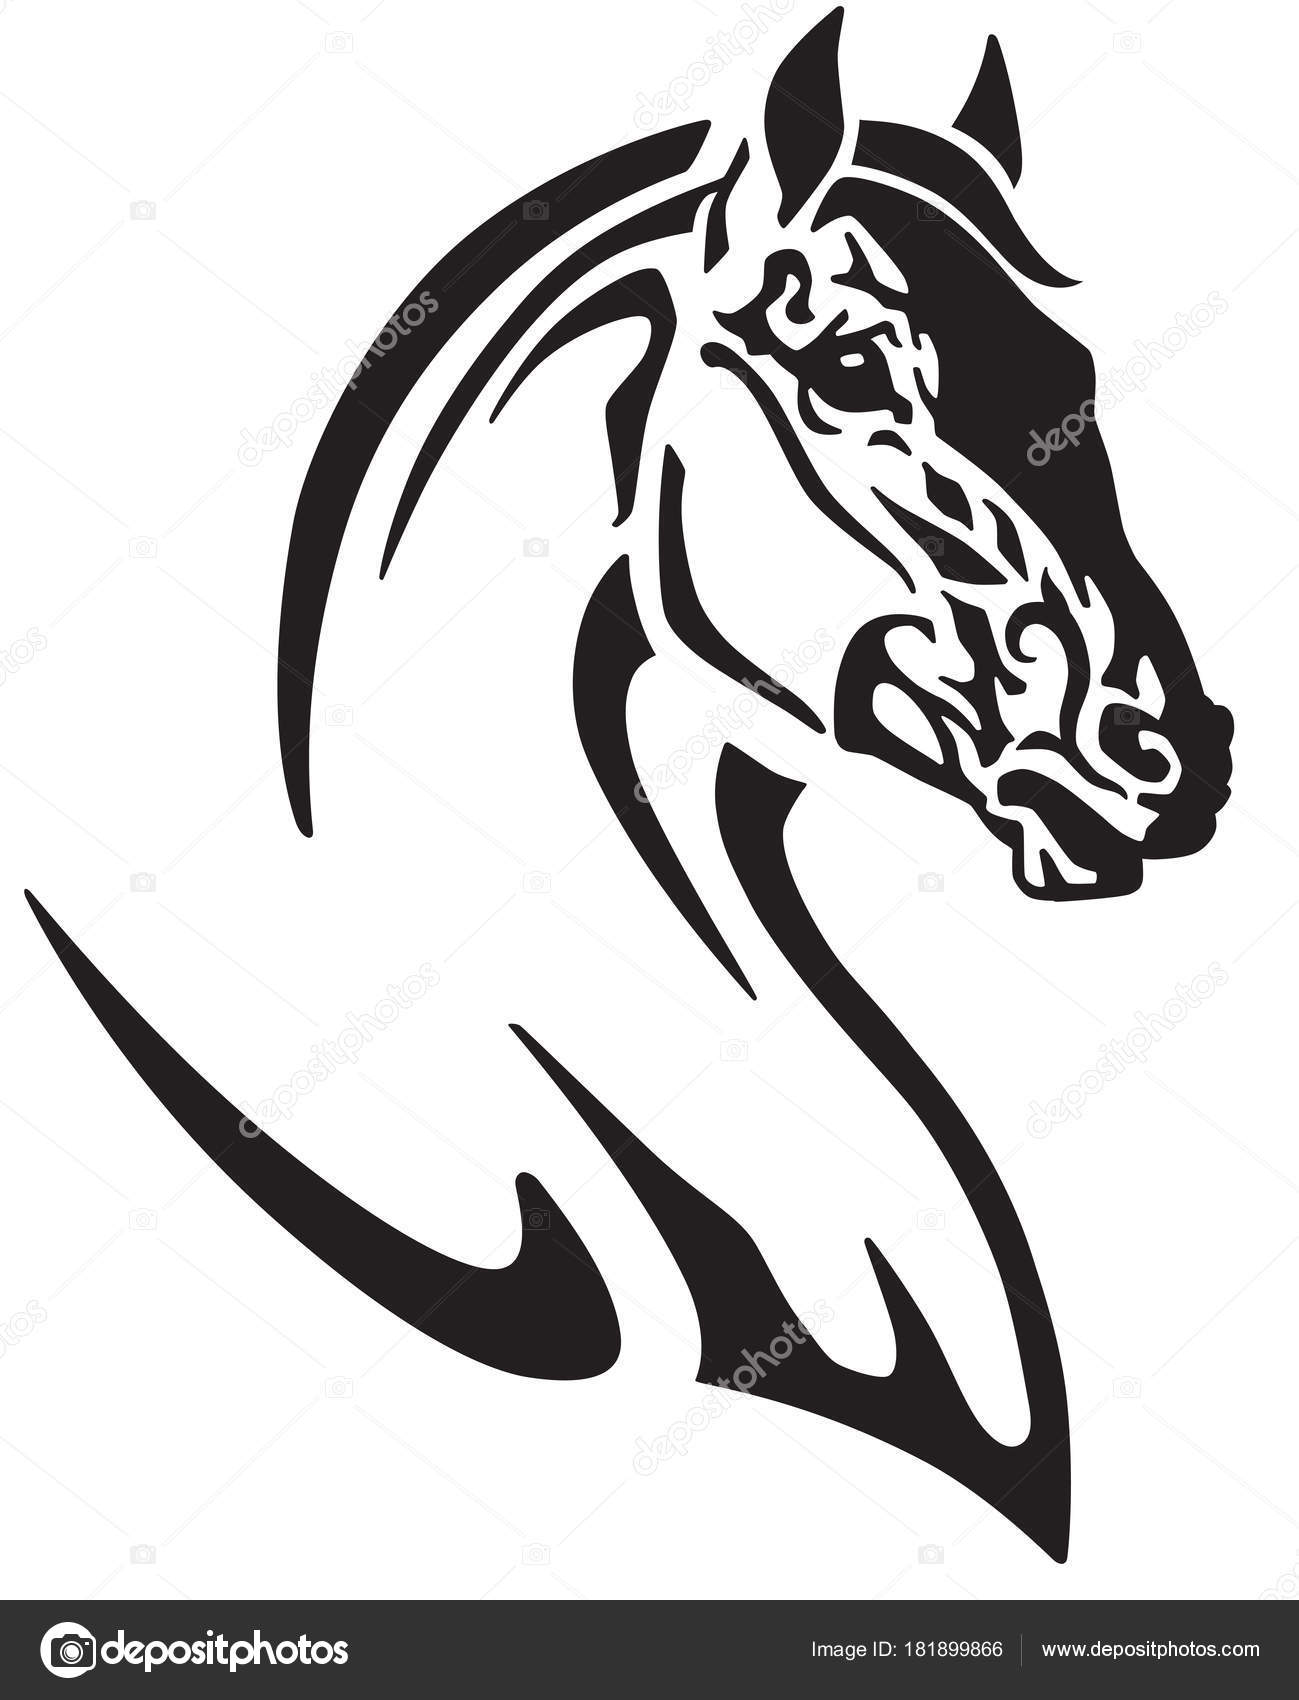 Free Images : tattoo, logo, jump, power, racing, silhouette, stallion,  tribal, outline, abstract, attractive, beautiful, contour, cute, design,  drawing, elegance, freedom, graphic, head, illustration, nature, riding,  sign, simplicity, speed, sport ...